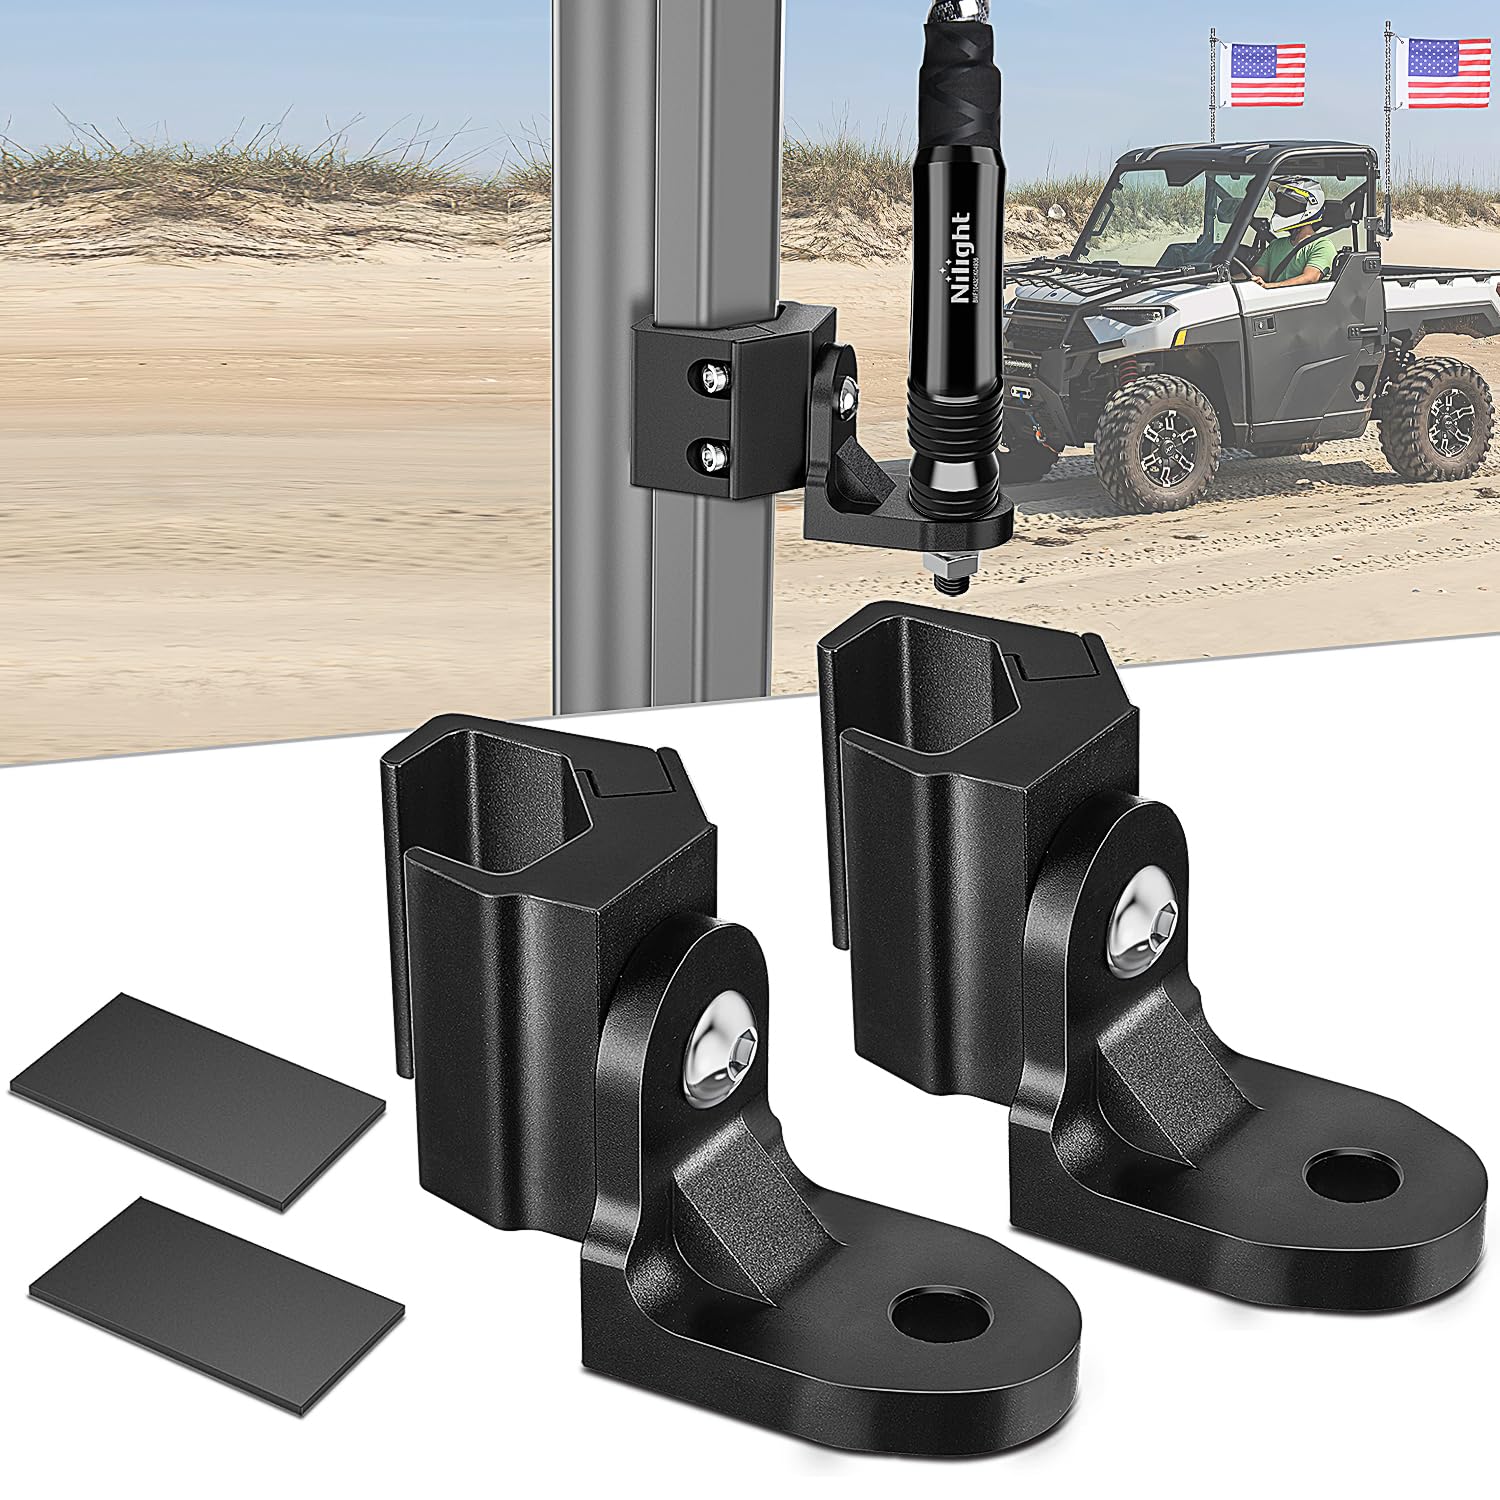 Nilight UTV Whip Light Mount 2PCS Flag Antenna Mounting Brackets Adjustable for Pro-fit Cage Compatible with Polaris Ranger General Can am Defender Commander Maverick Trail/Sport, 2 Years Warranty